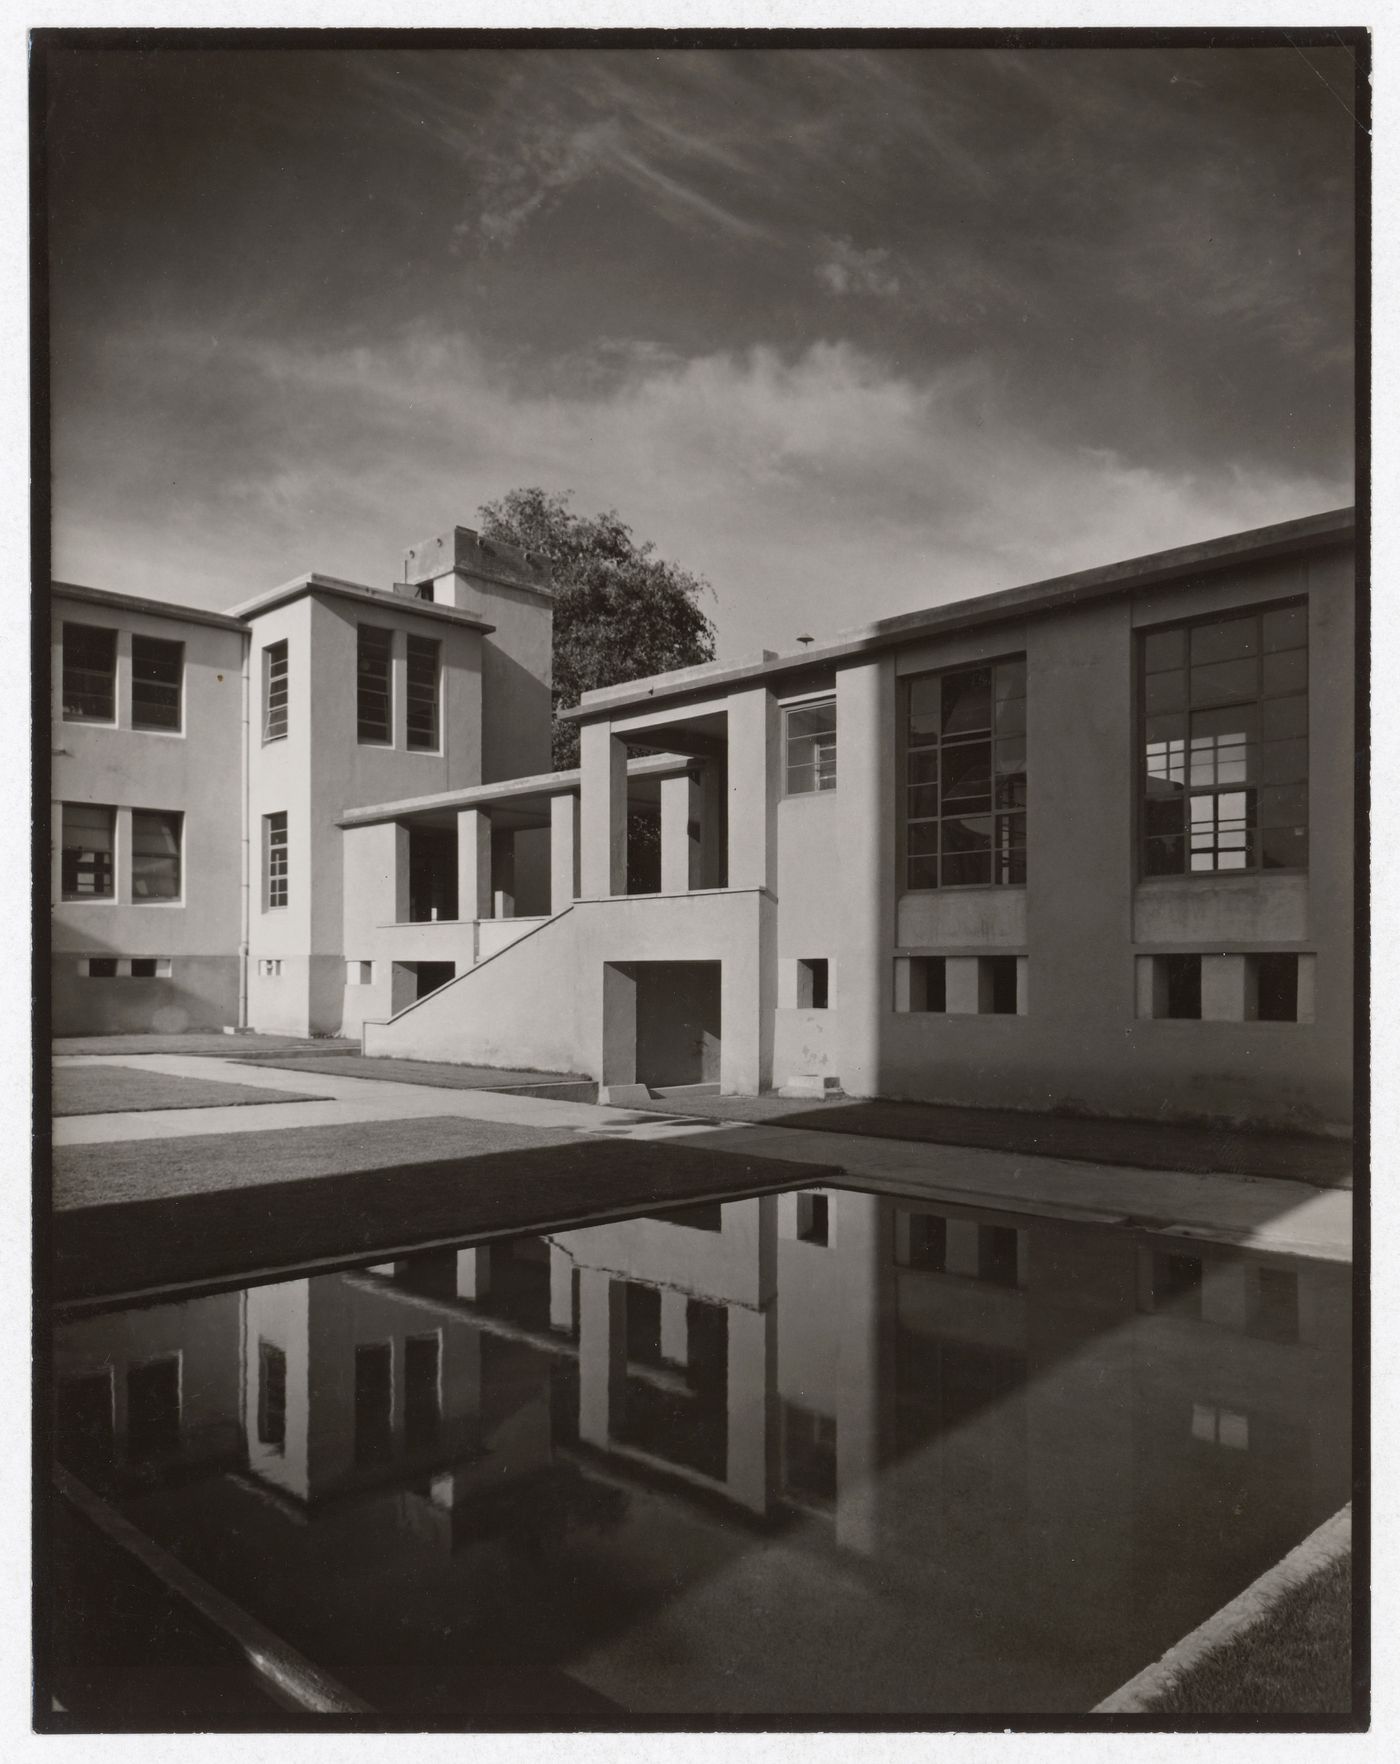 View of the courtyard and pool of the Sanatorio Antituberculoso, Huipulco, Tlalpan, D.F.